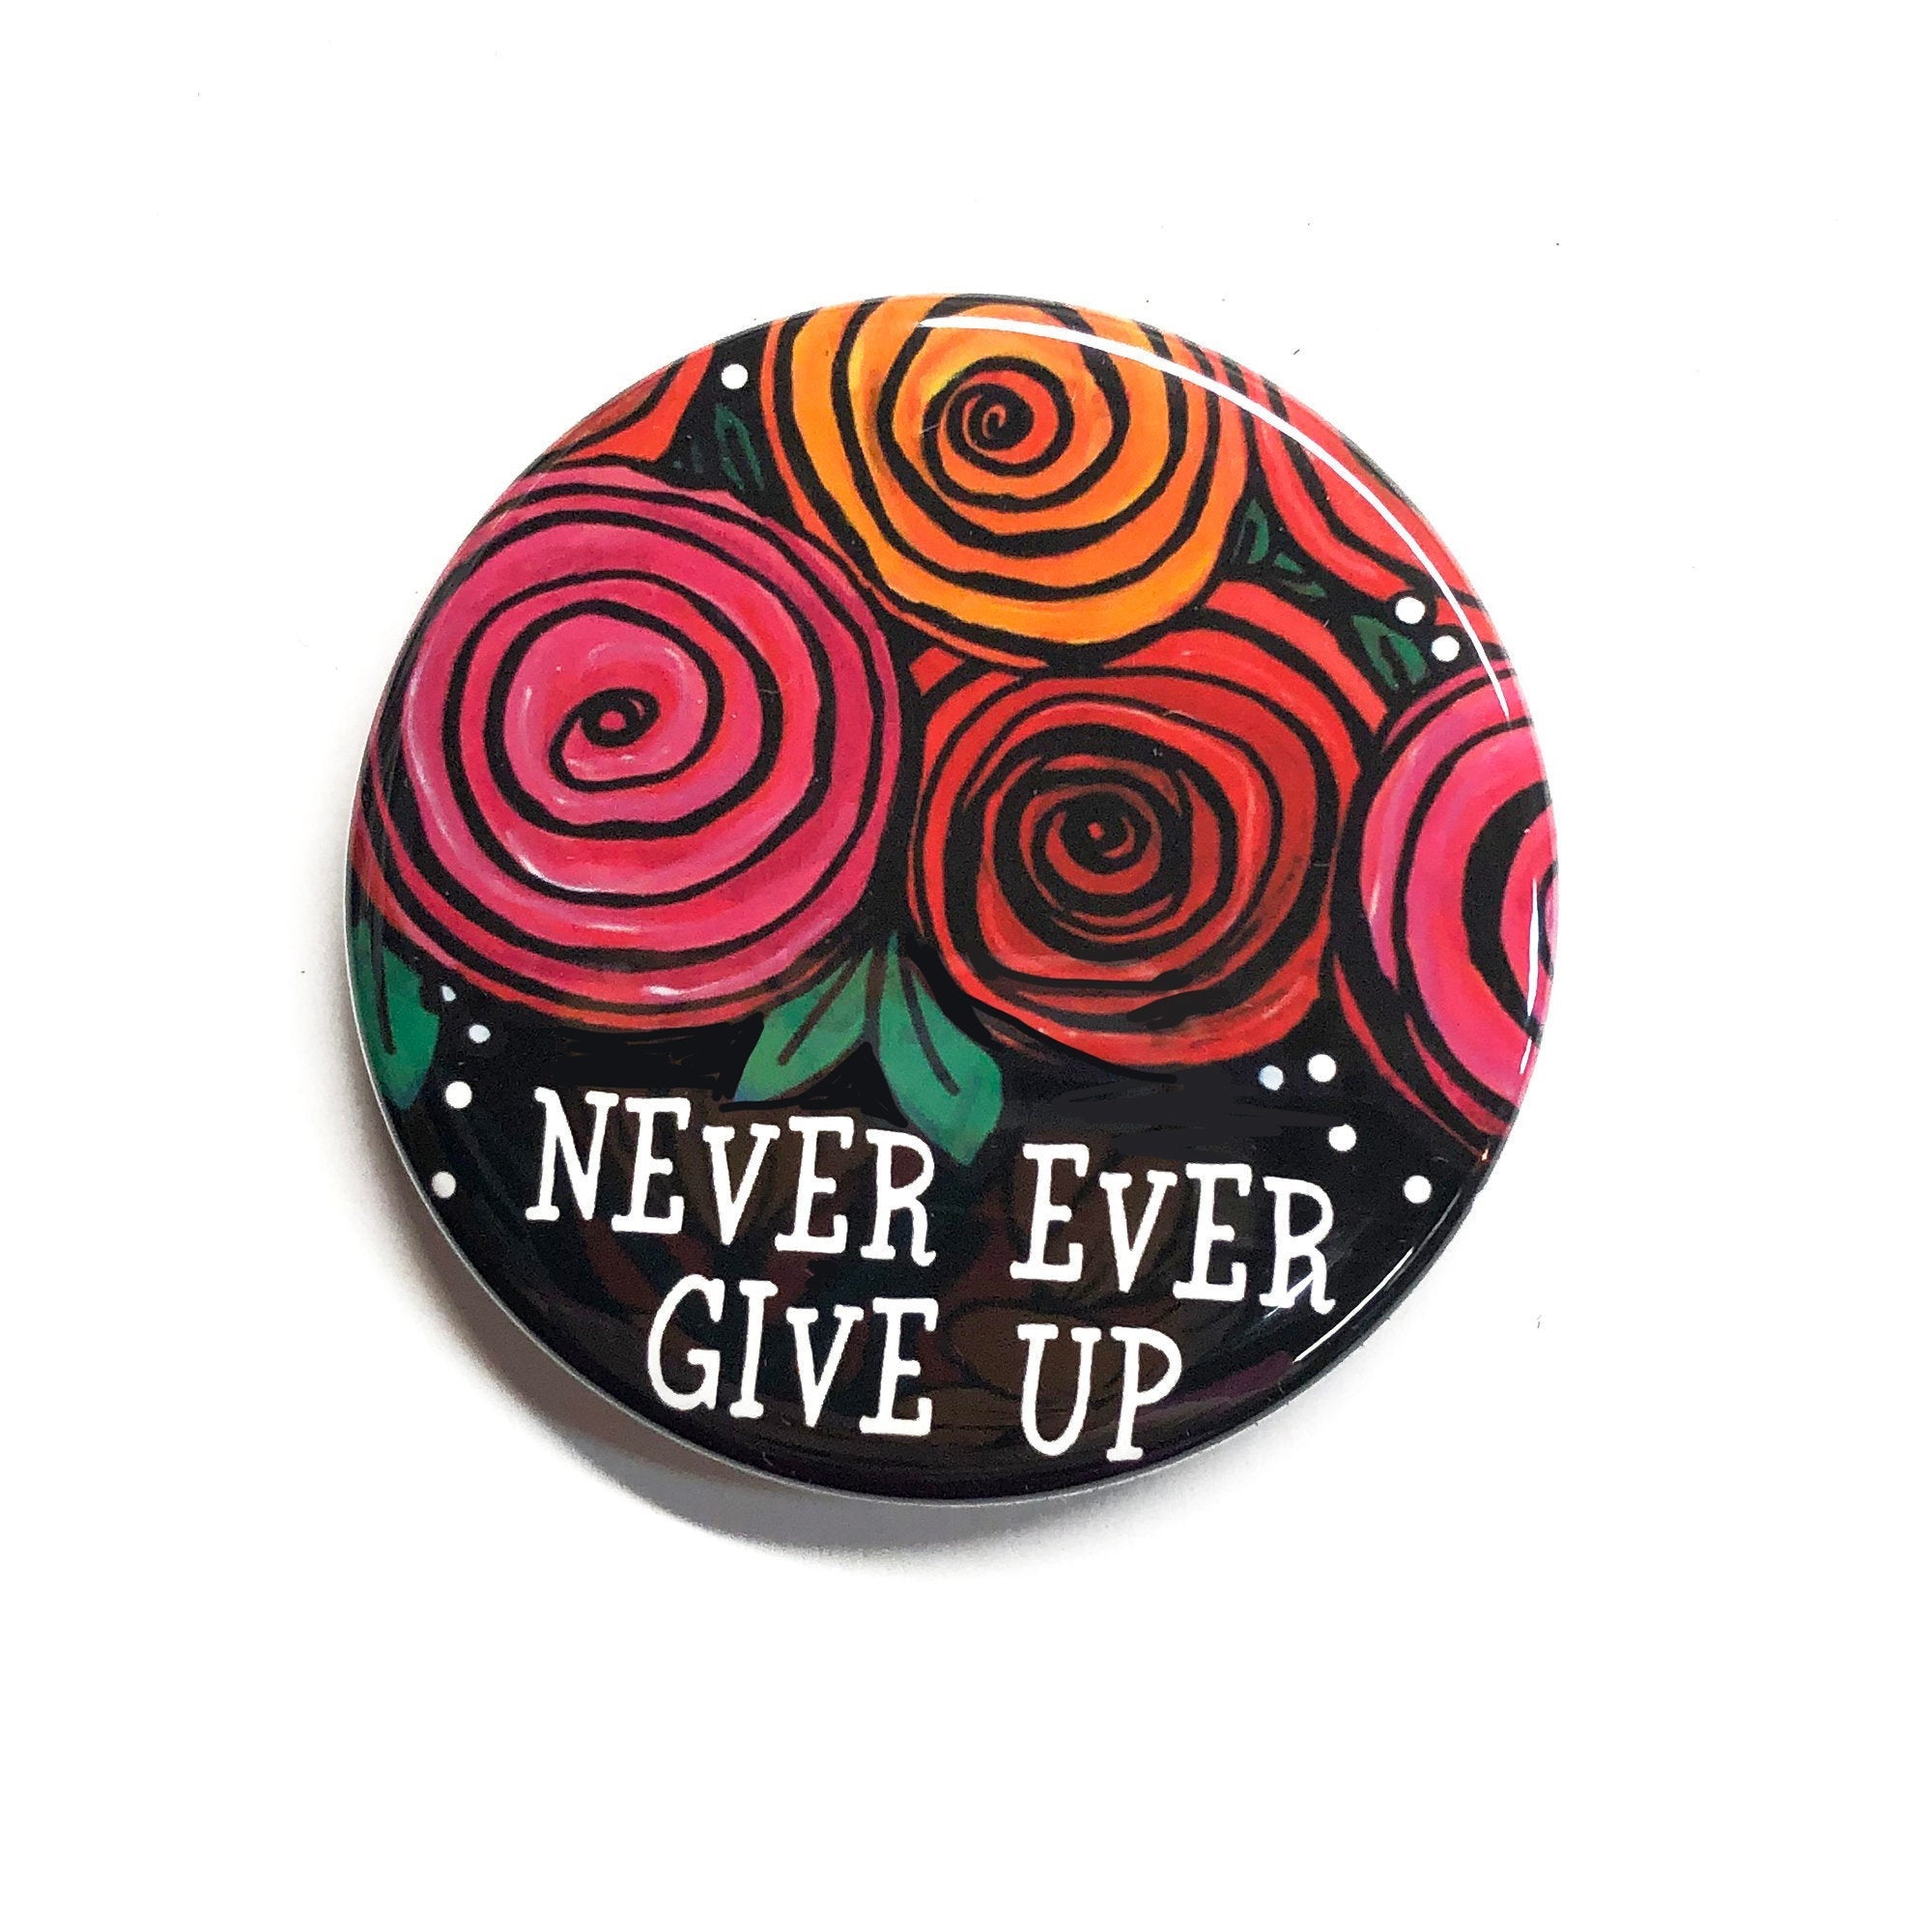 Never Ever Give Up Magnet, Pin or Pocket Mirror